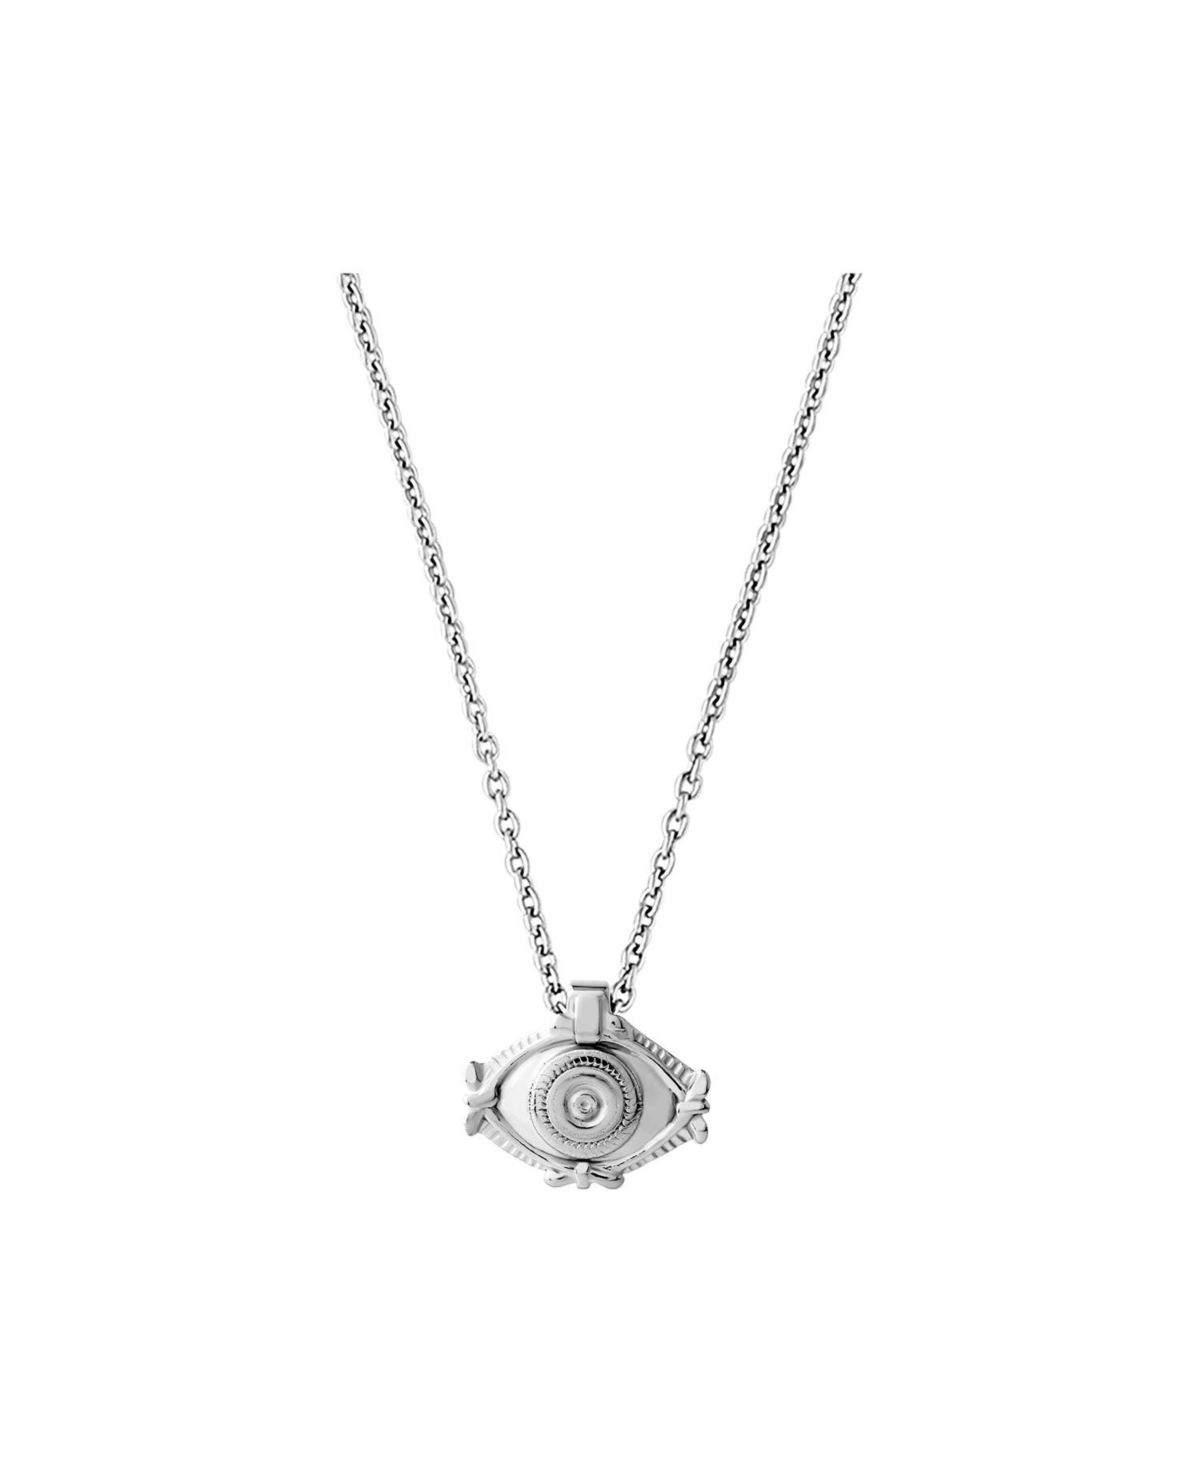 Protection Charm Necklace Silver - Silver